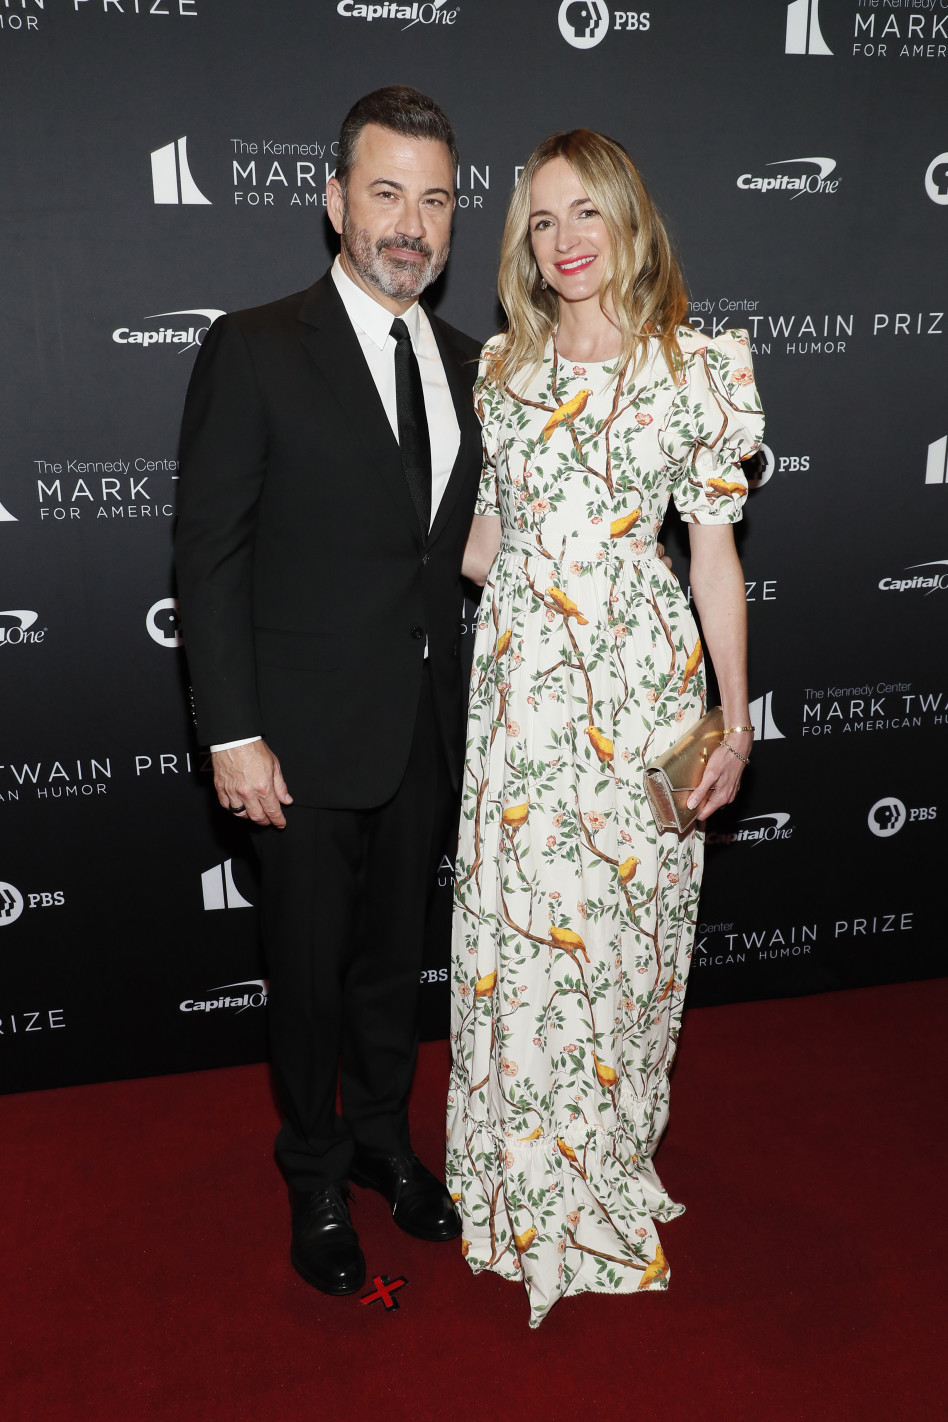 Jimmy Kimmel and his wife (Photo: getty images / Paul Morigi)